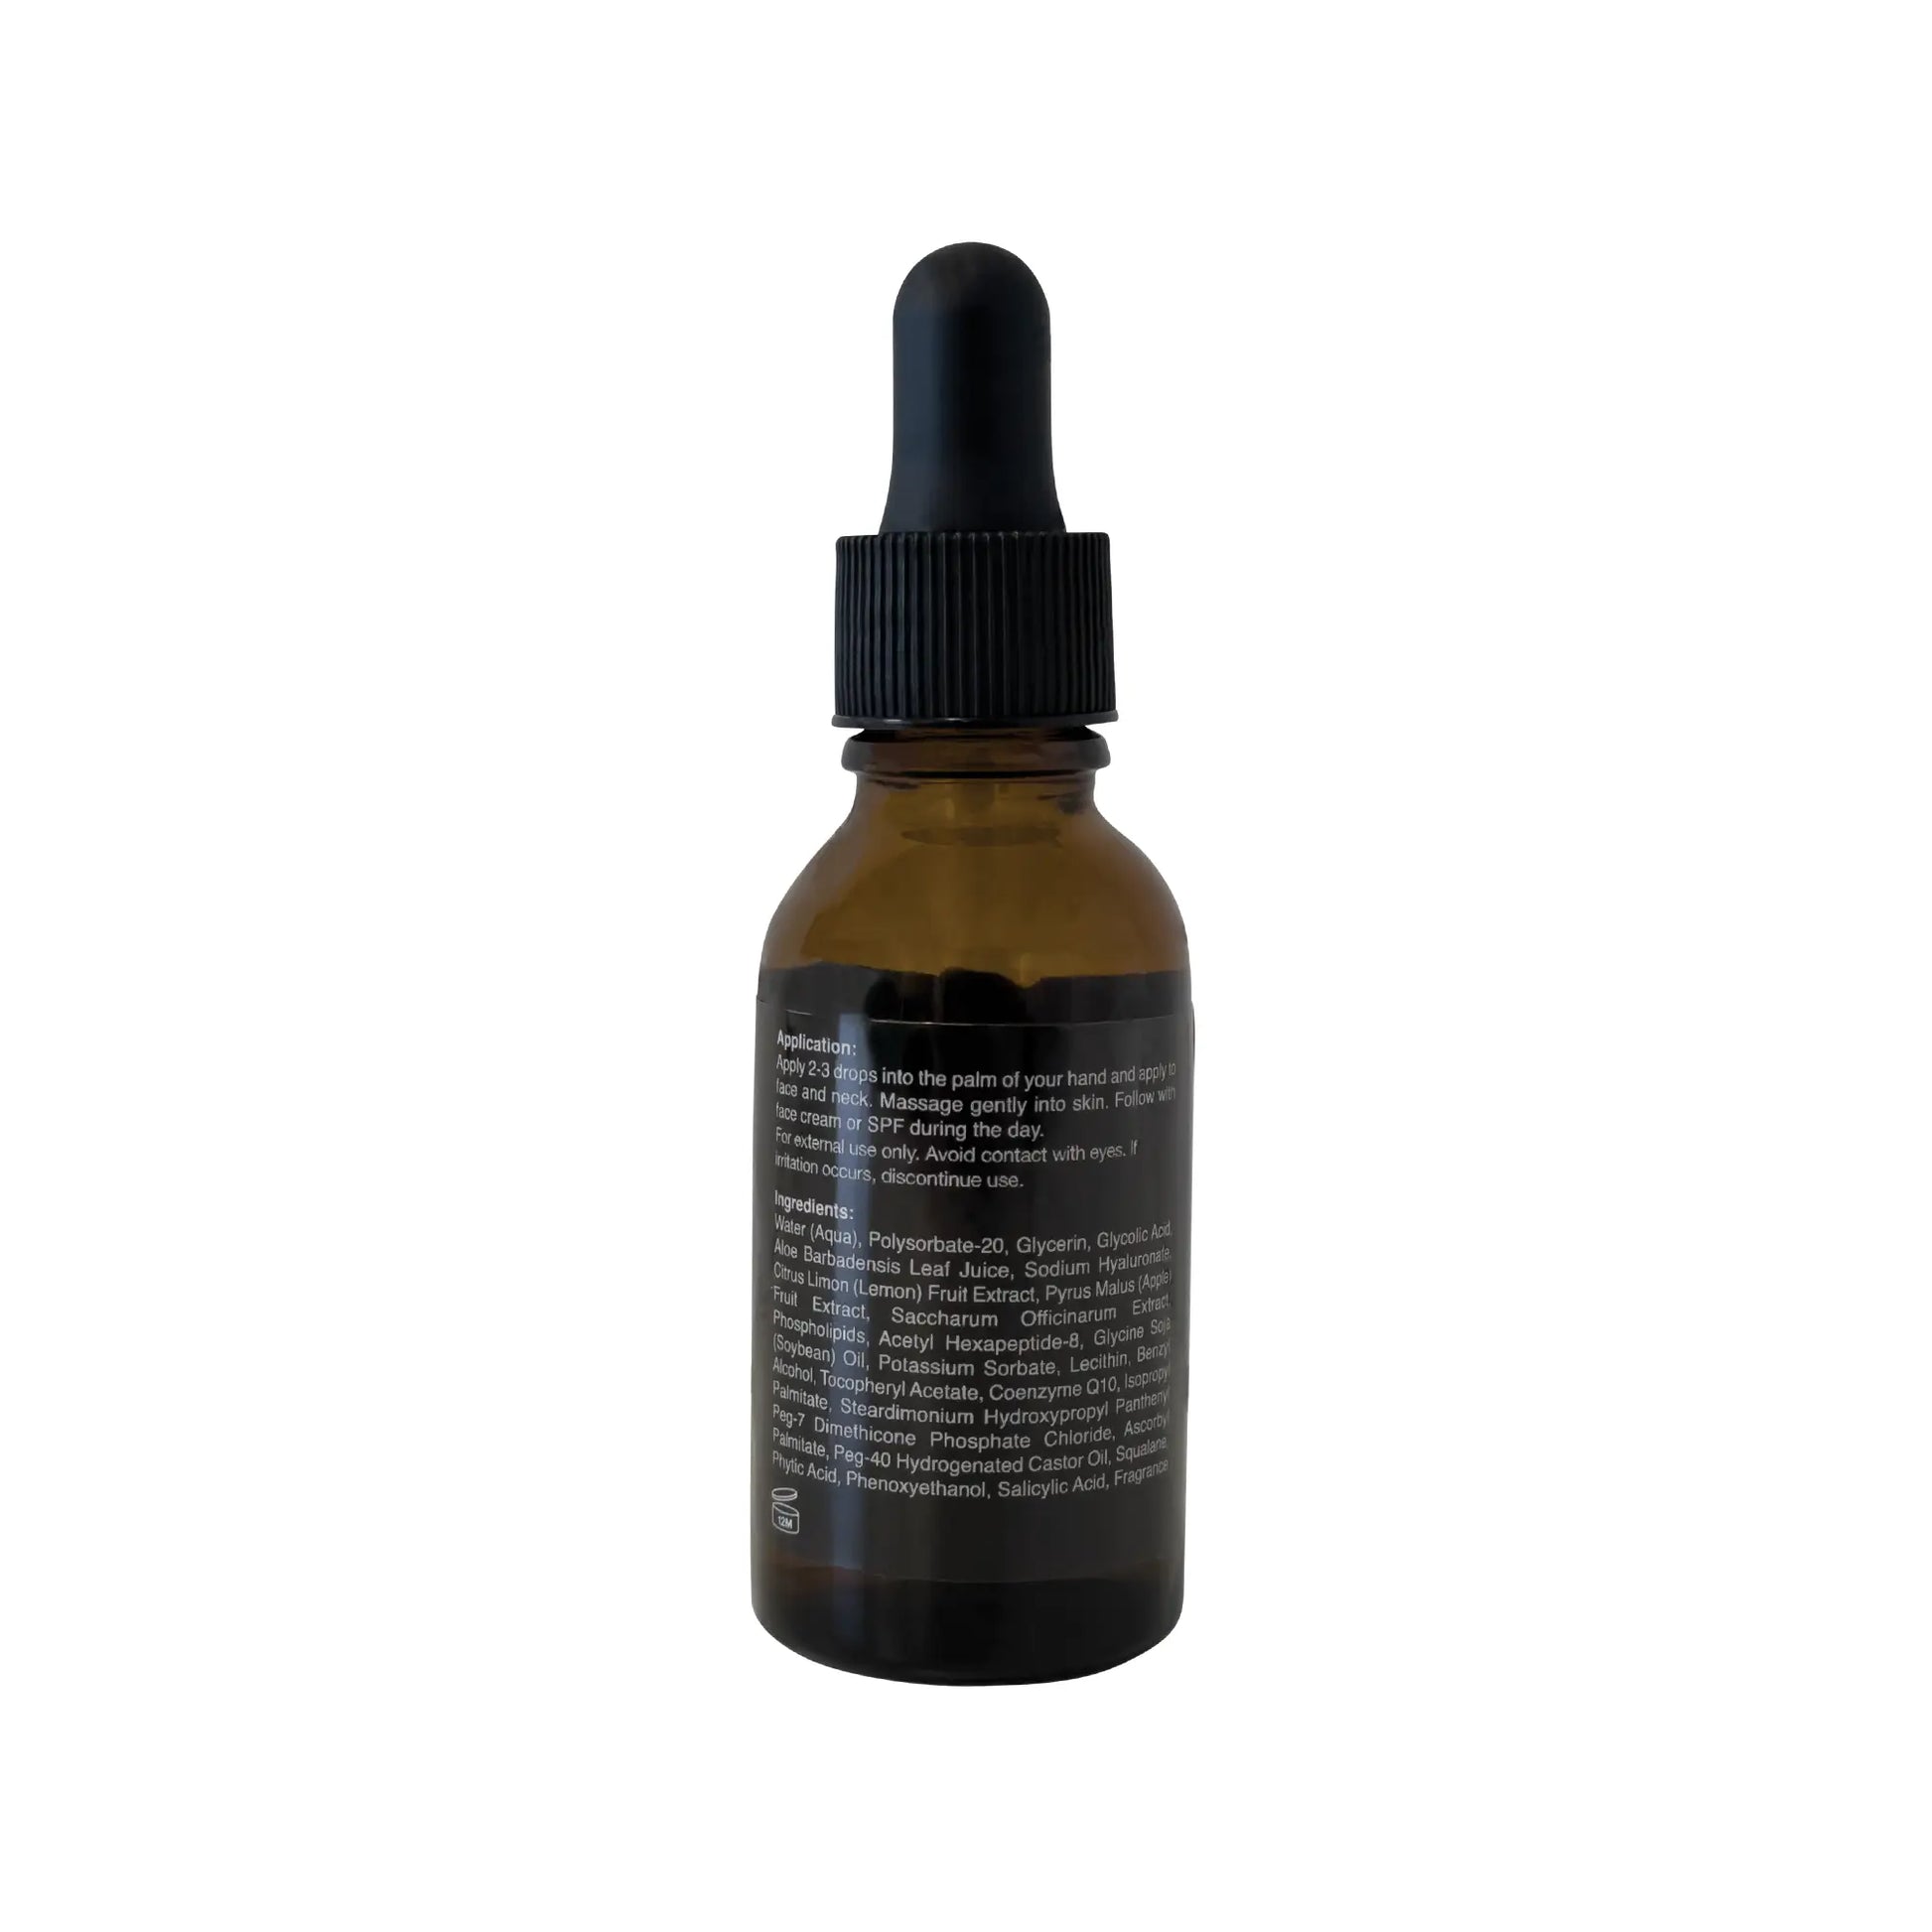 A bottle of Glycolic Acid Serum facial oil on a white background.